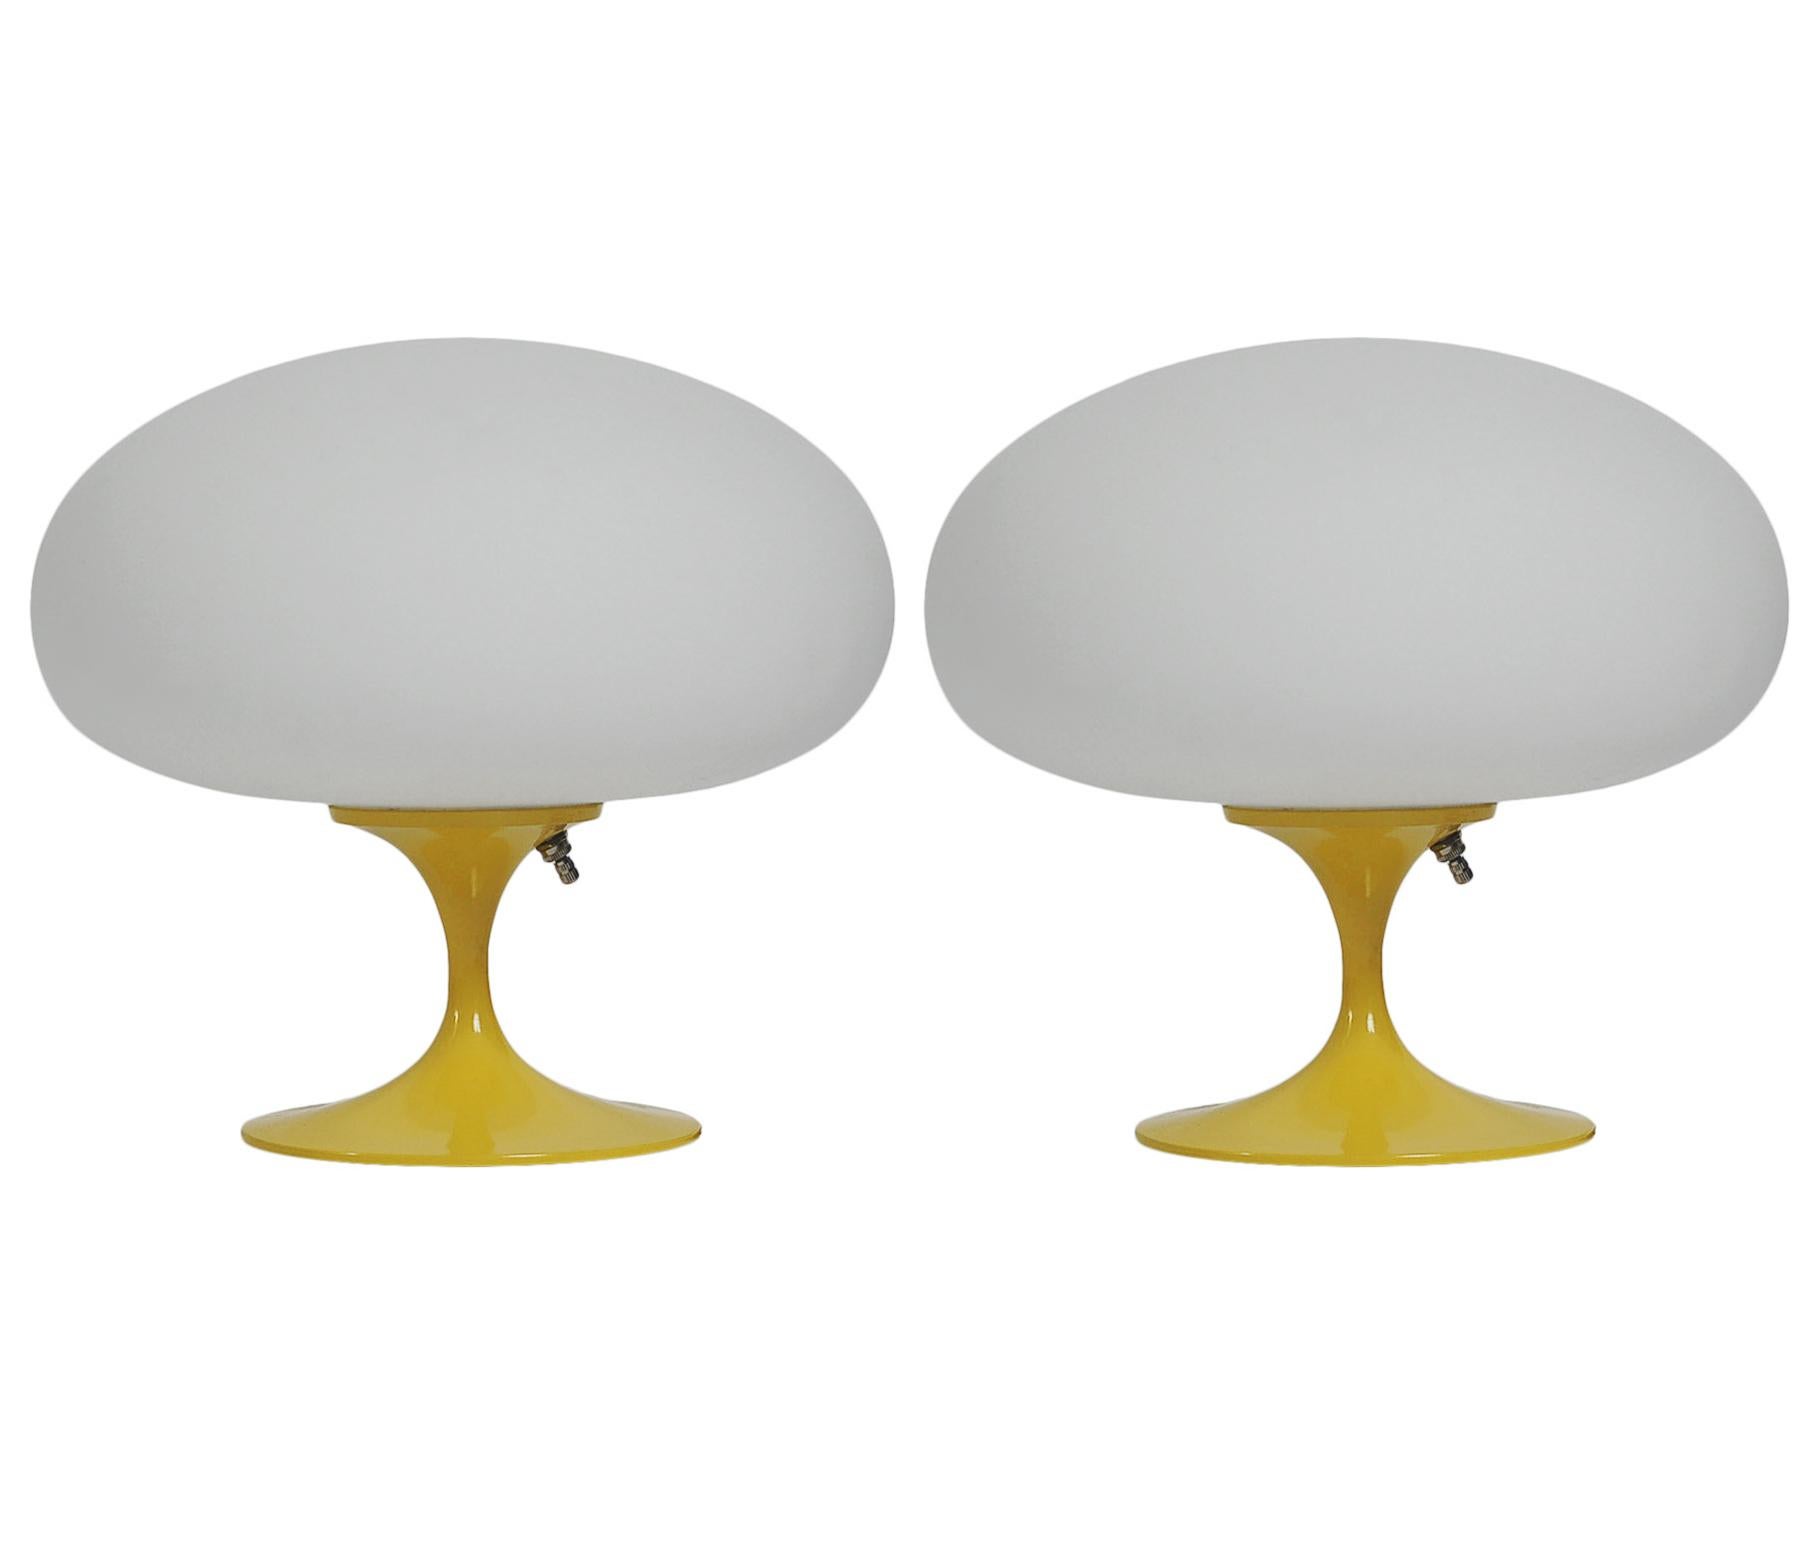 Pair of Mid Century Tulip Mushroom Lamps by Designline in Yellow & White Glass In New Condition For Sale In Philadelphia, PA